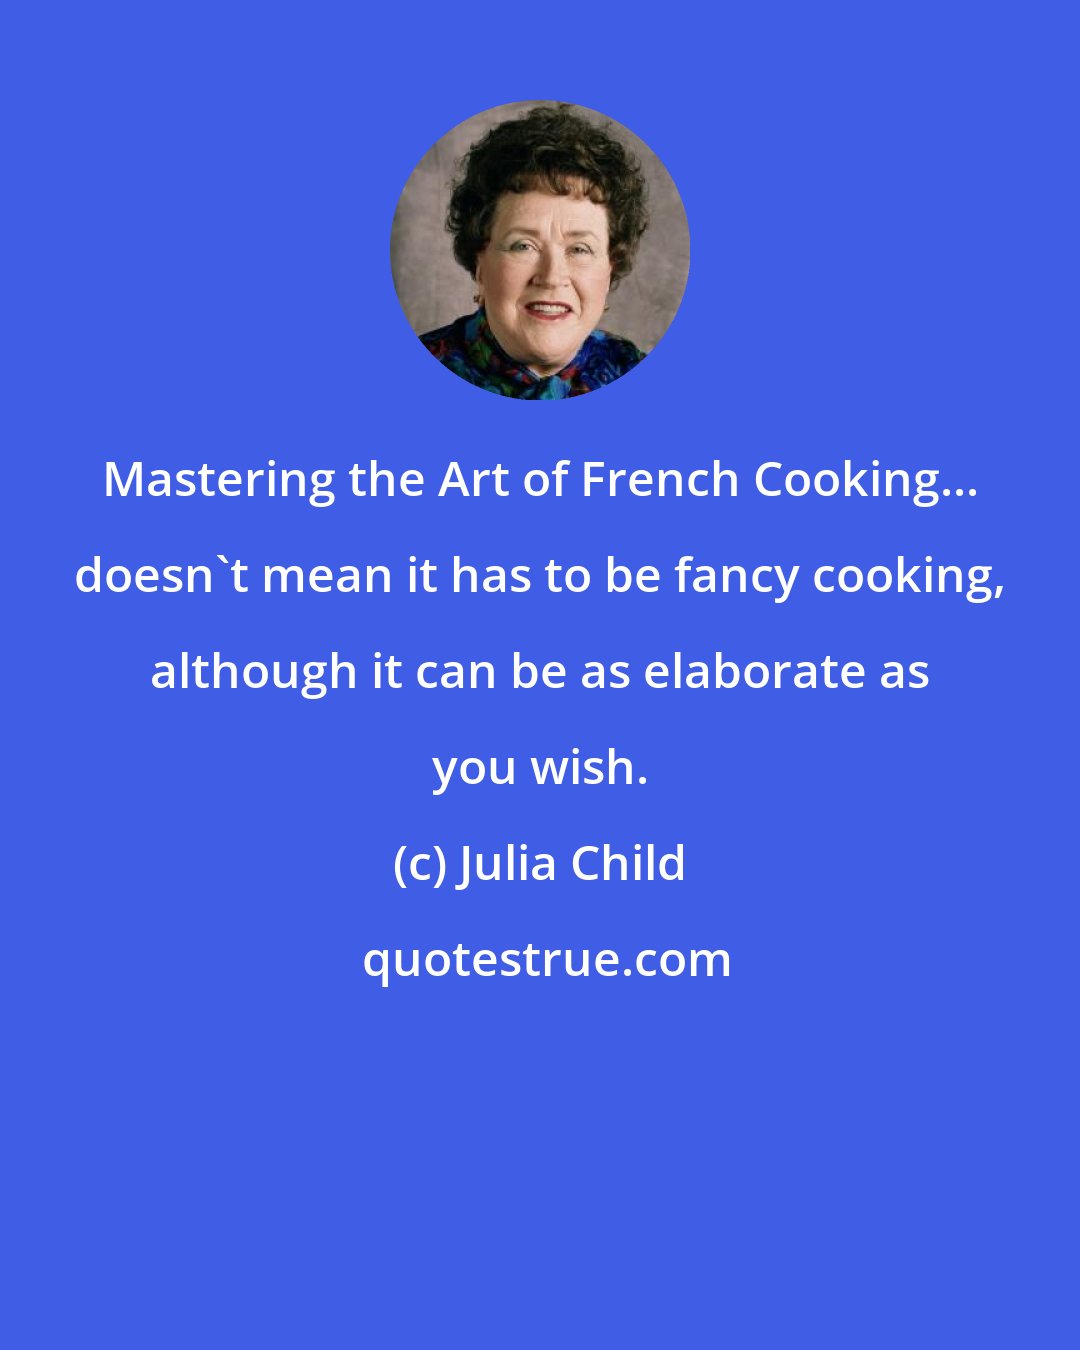 Julia Child: Mastering the Art of French Cooking... doesn't mean it has to be fancy cooking, although it can be as elaborate as you wish.